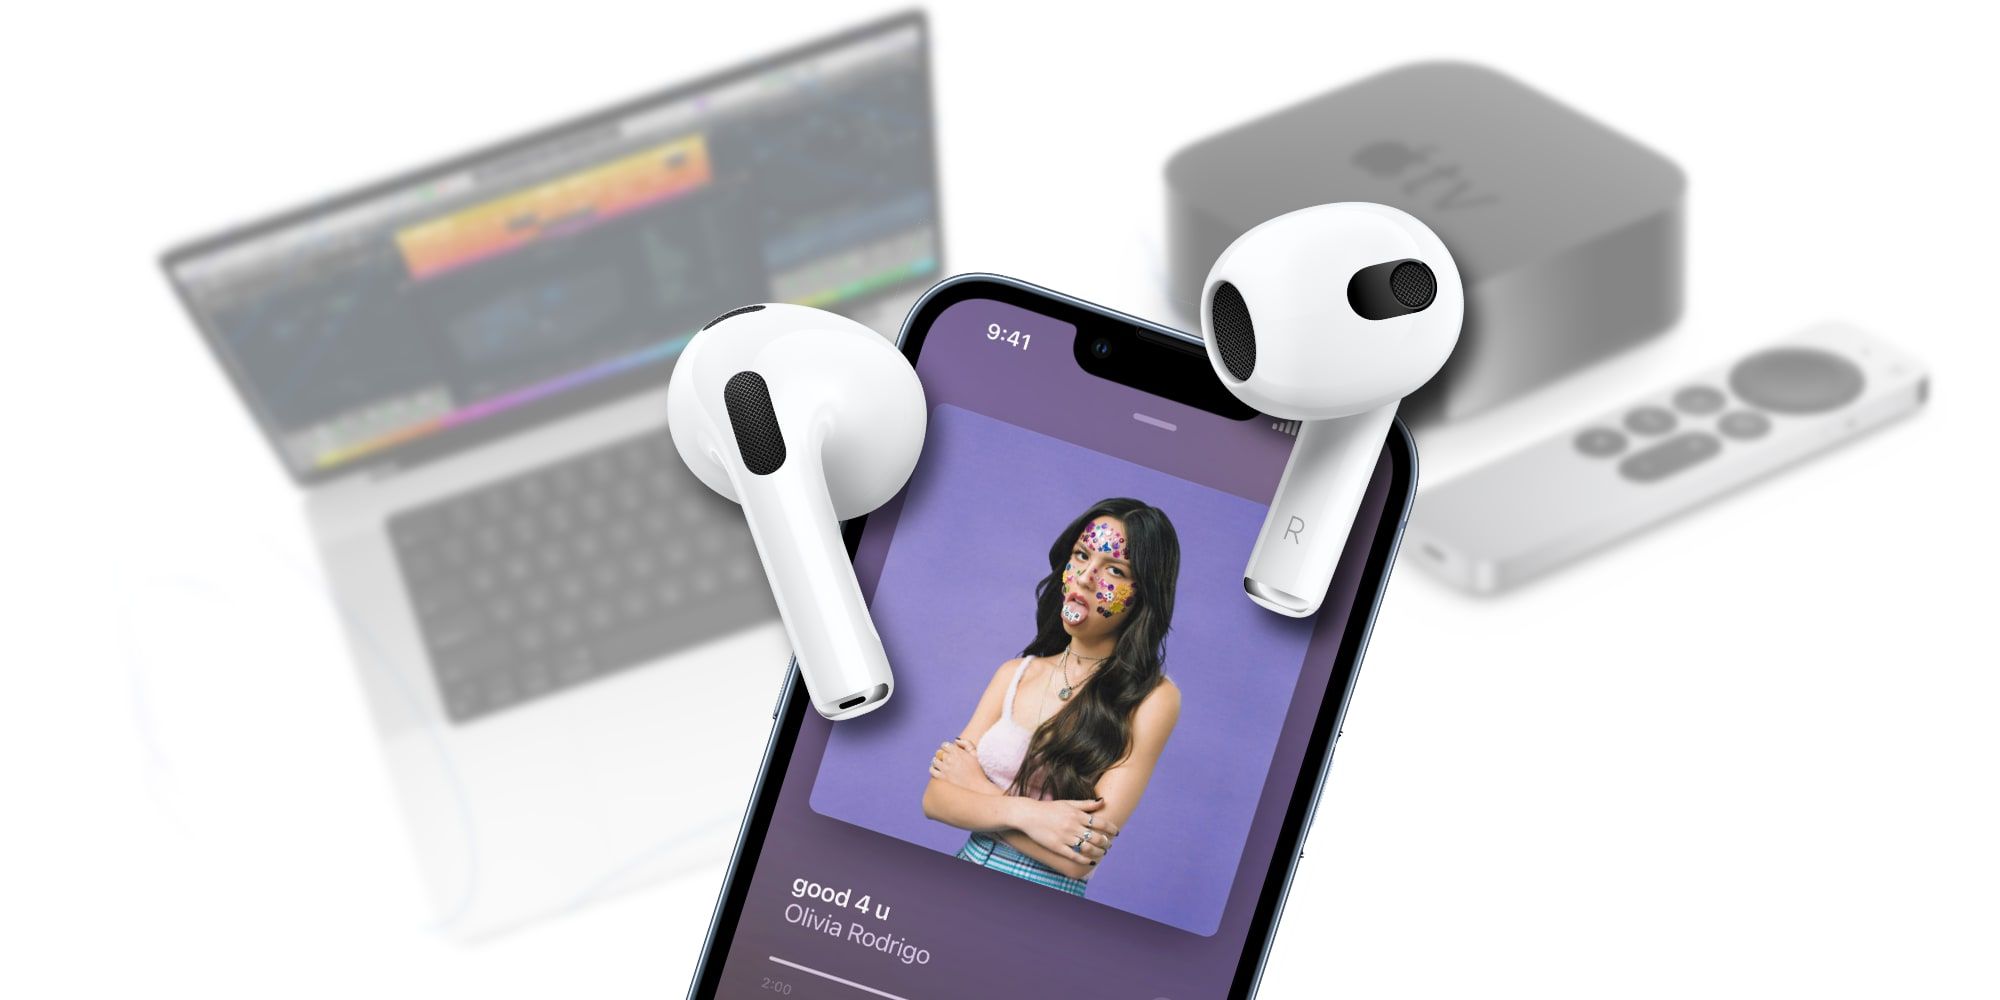 Apple AirPods Over iPhone With Faded MacBook Pro And Apple TV In BG